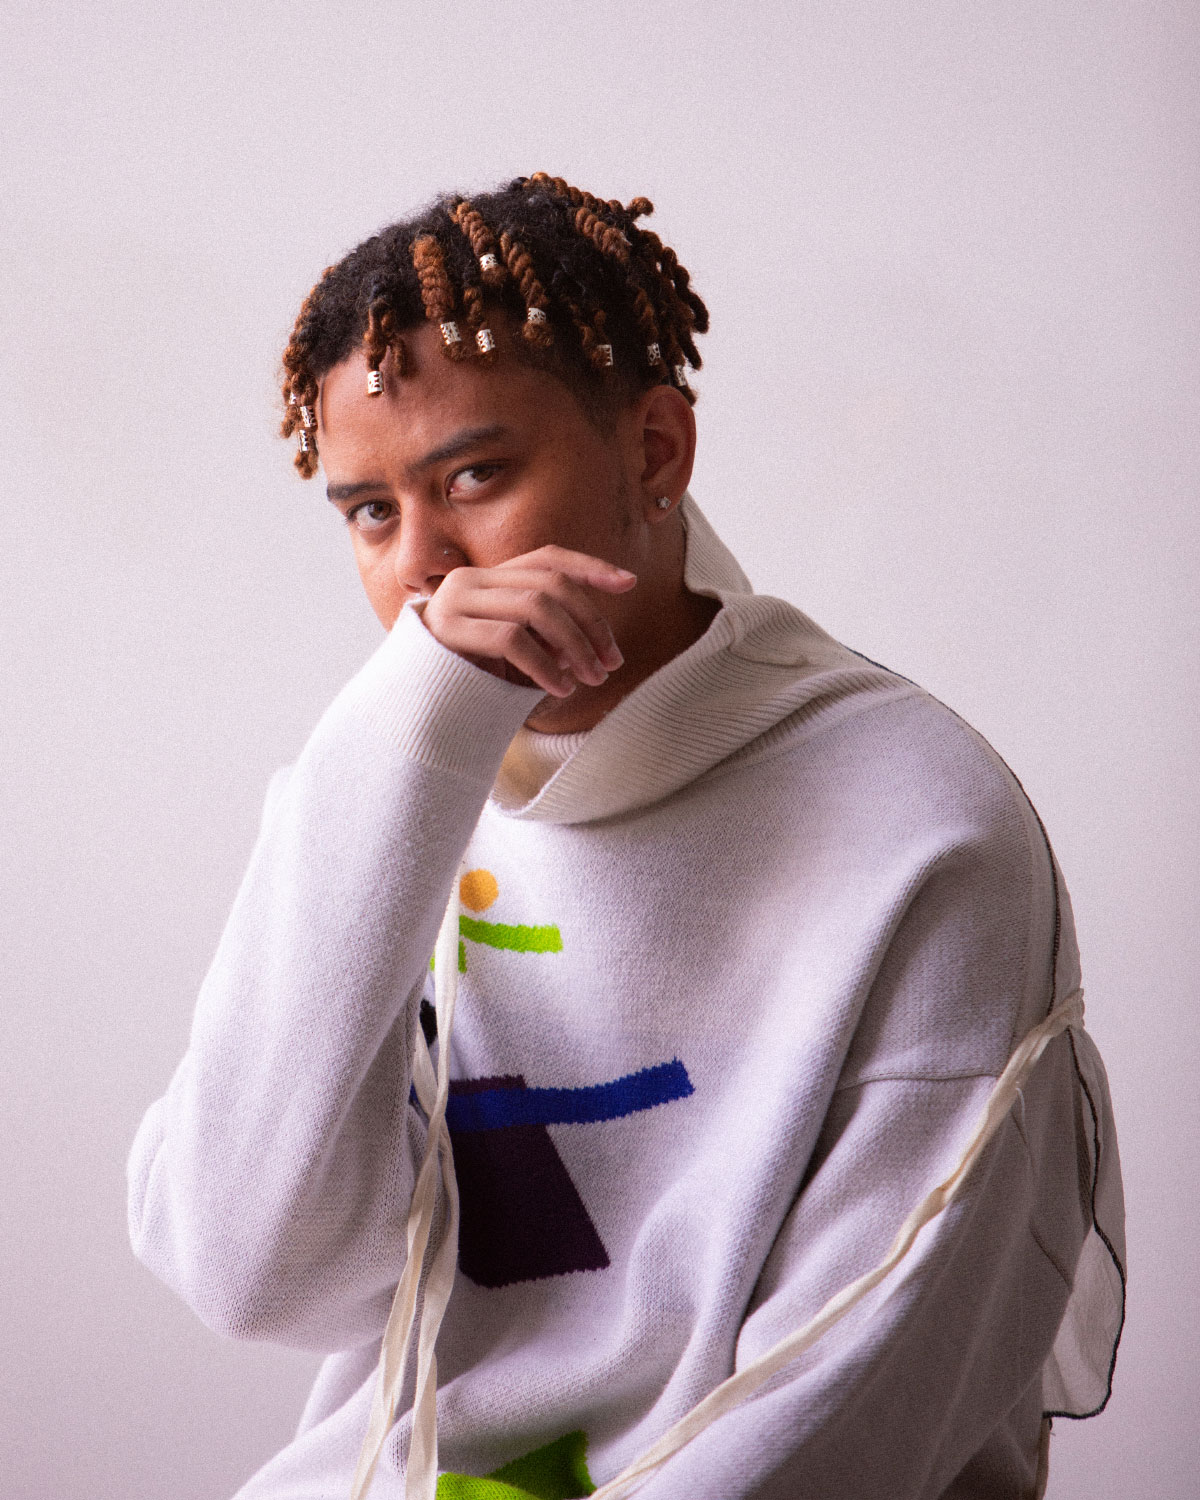 ybn cordae interview the lost boy